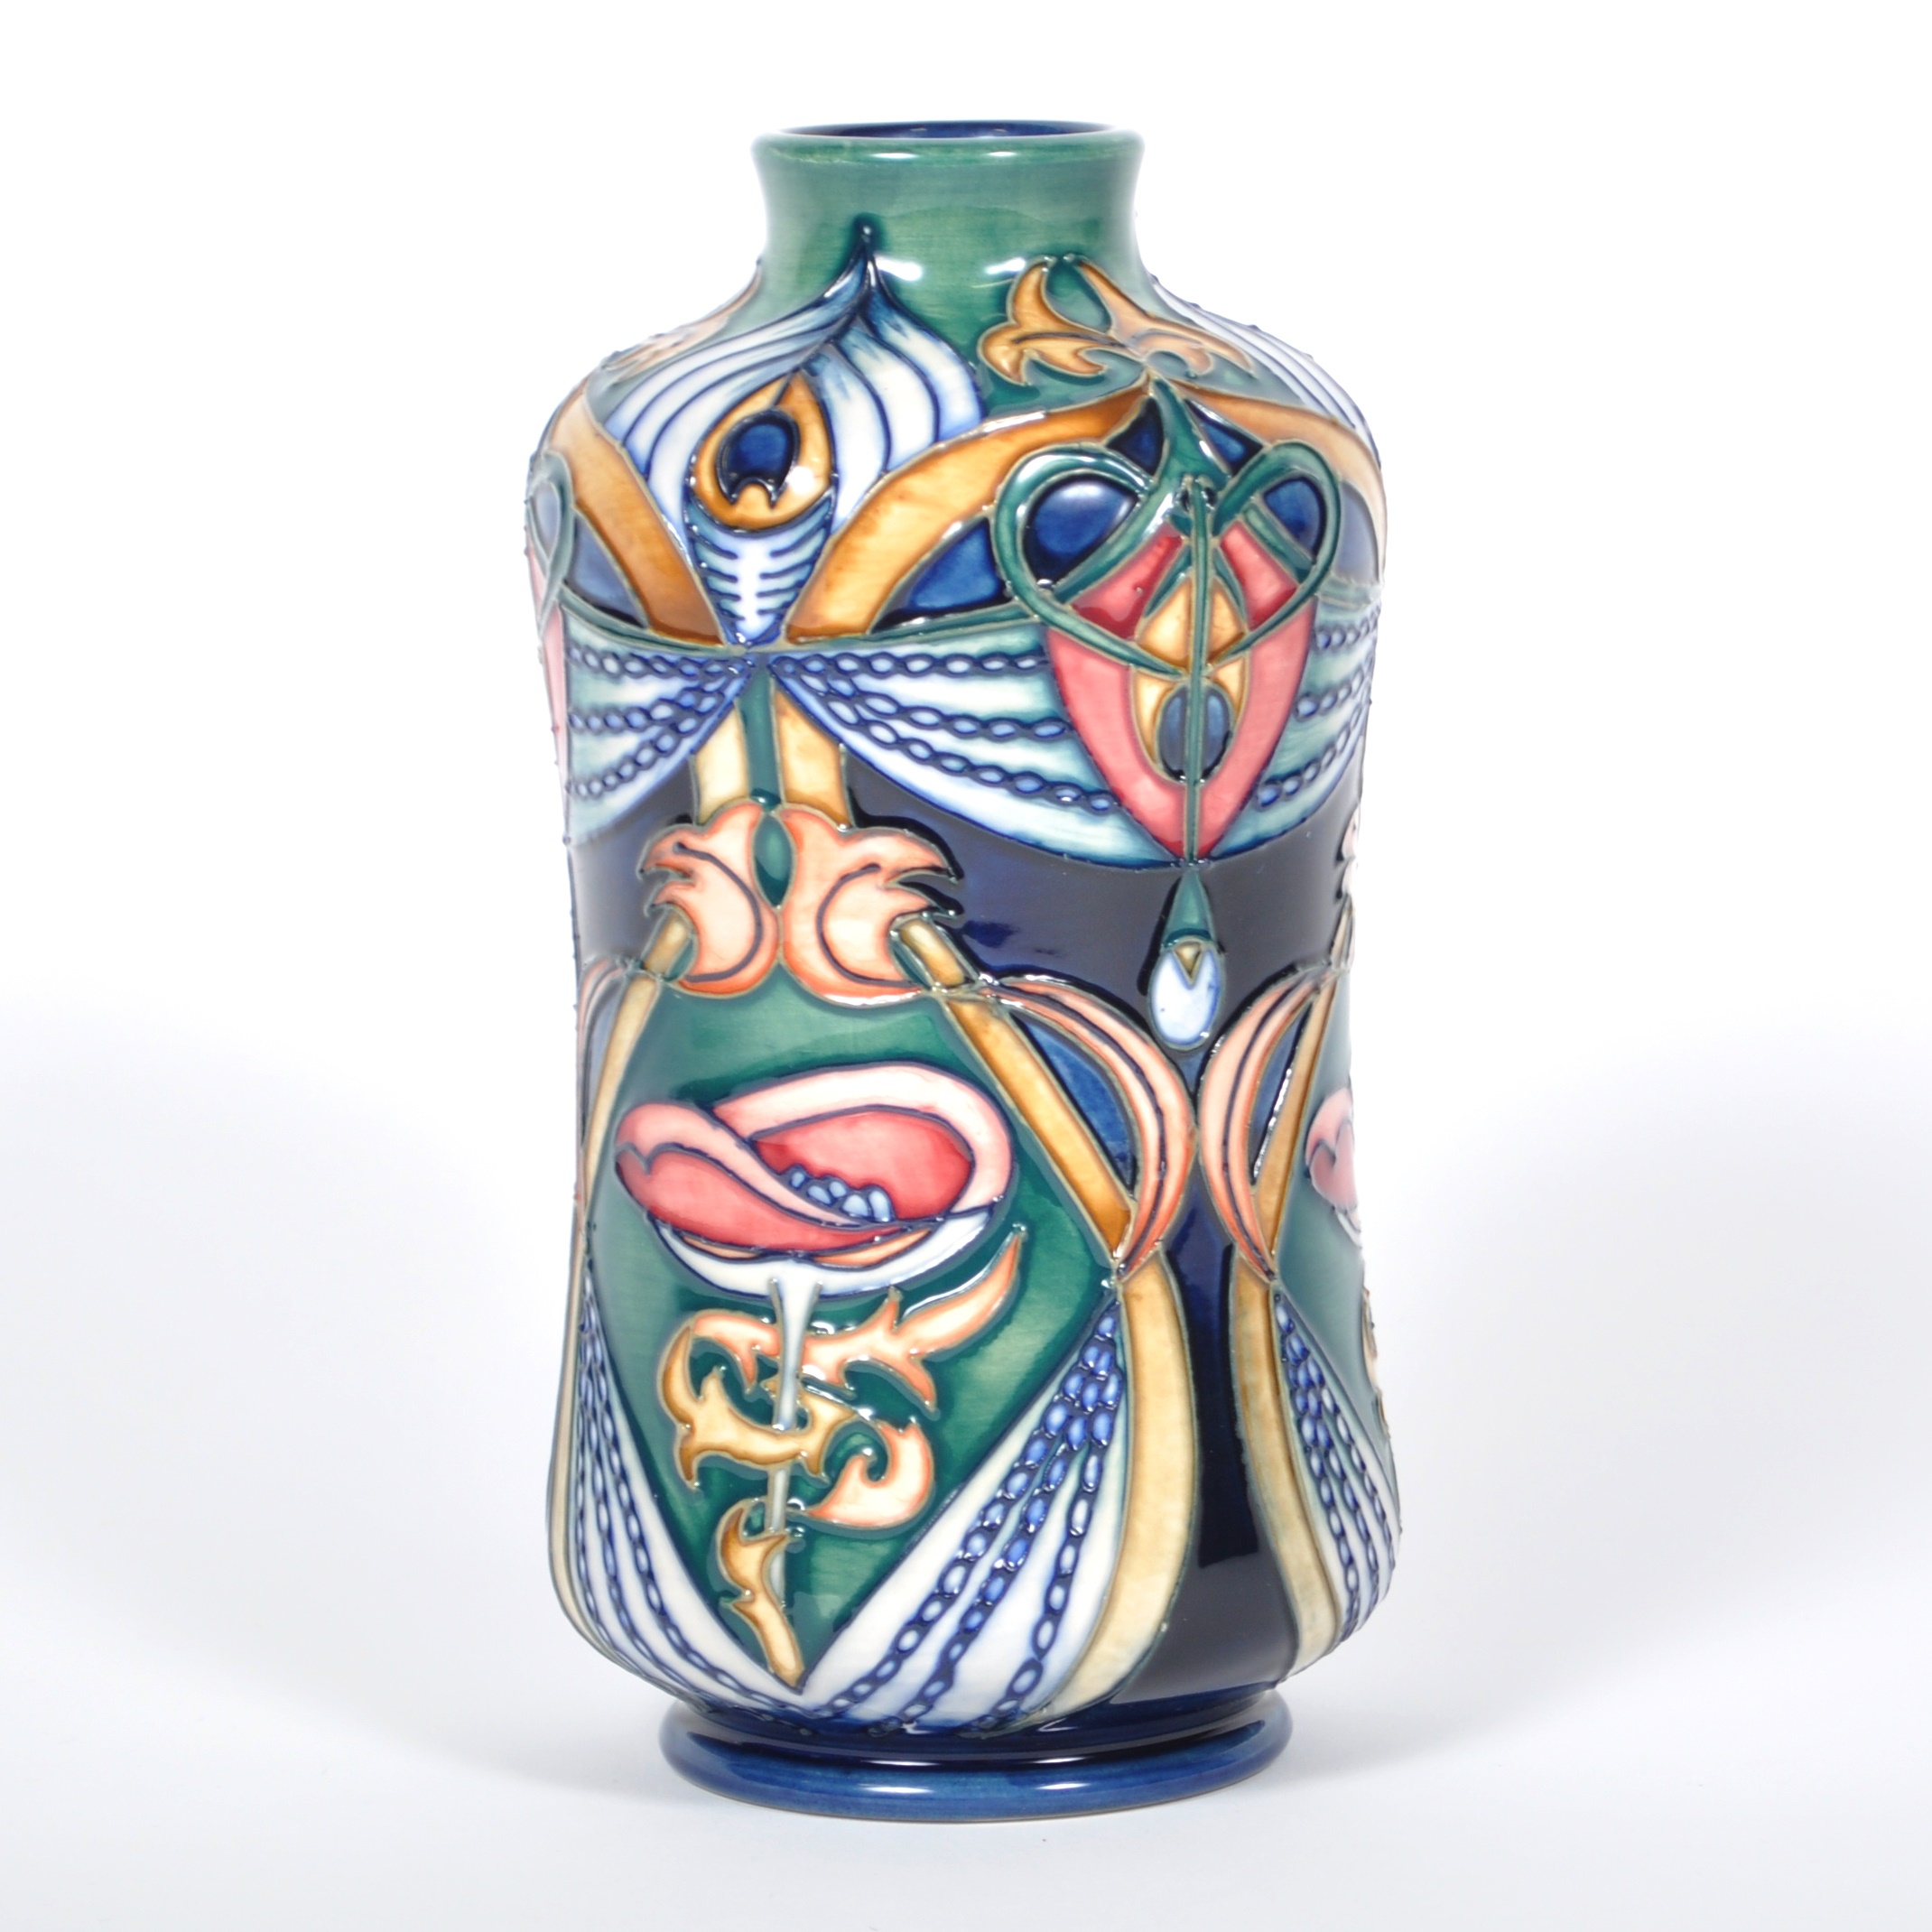 A Moorcroft Pottery vase, 'Cymric Dream' designed by Rachel Bishop for Liberty & Co